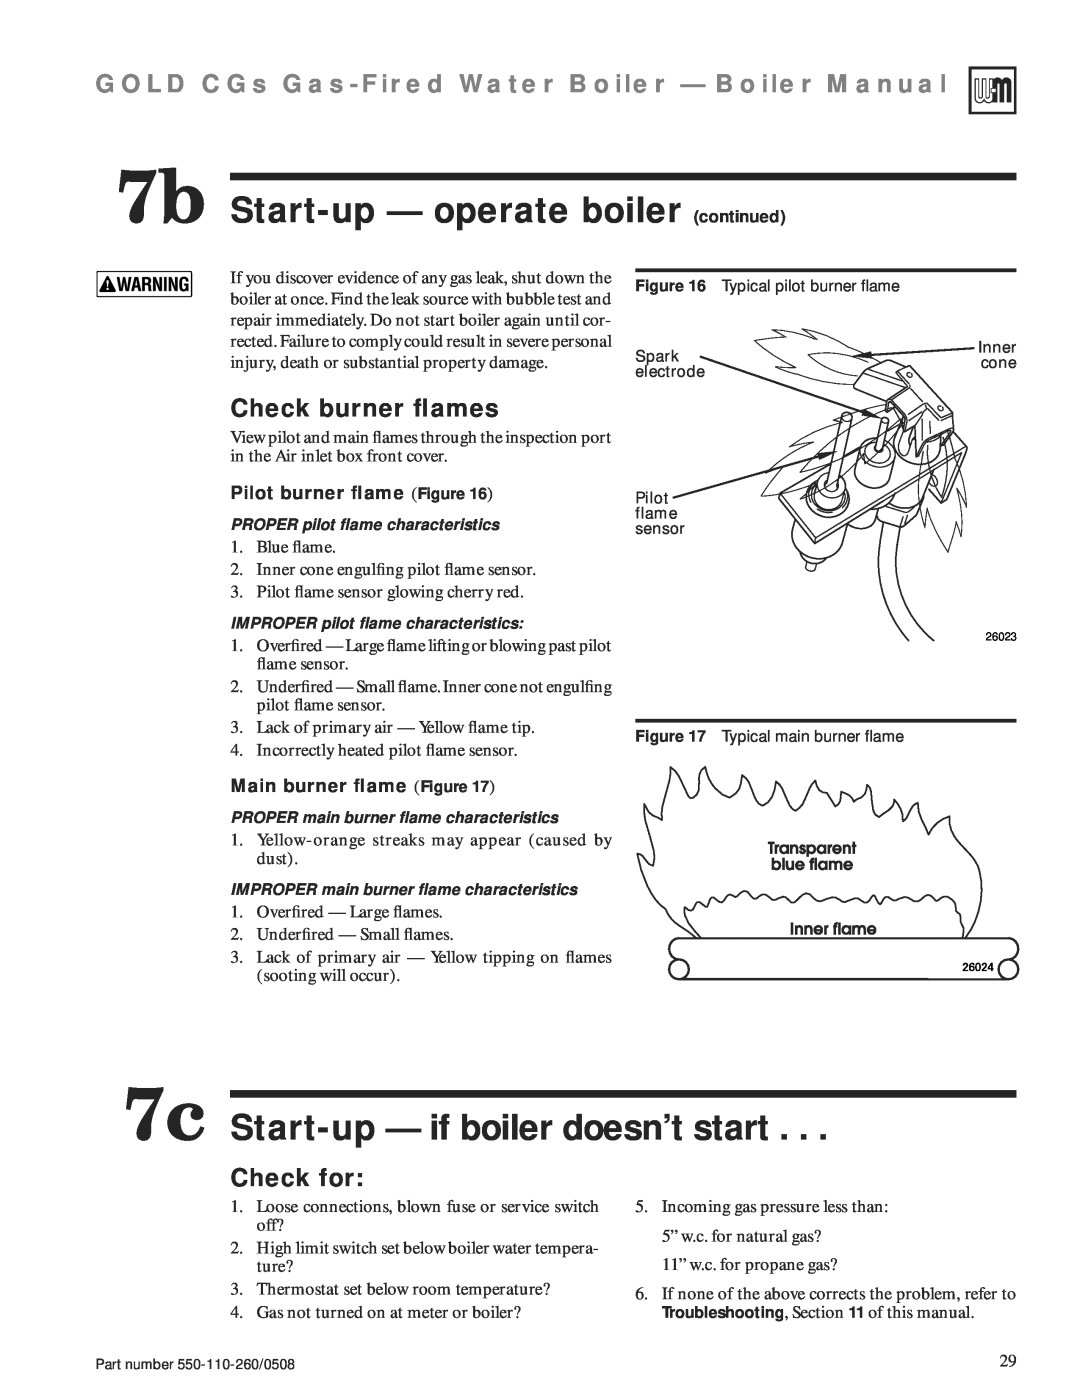 Weil-McLain 550-110-260/0508 manual 7b Start-up- operate boiler continued, 7c Start-up— if boiler doesn’t start, Check for 